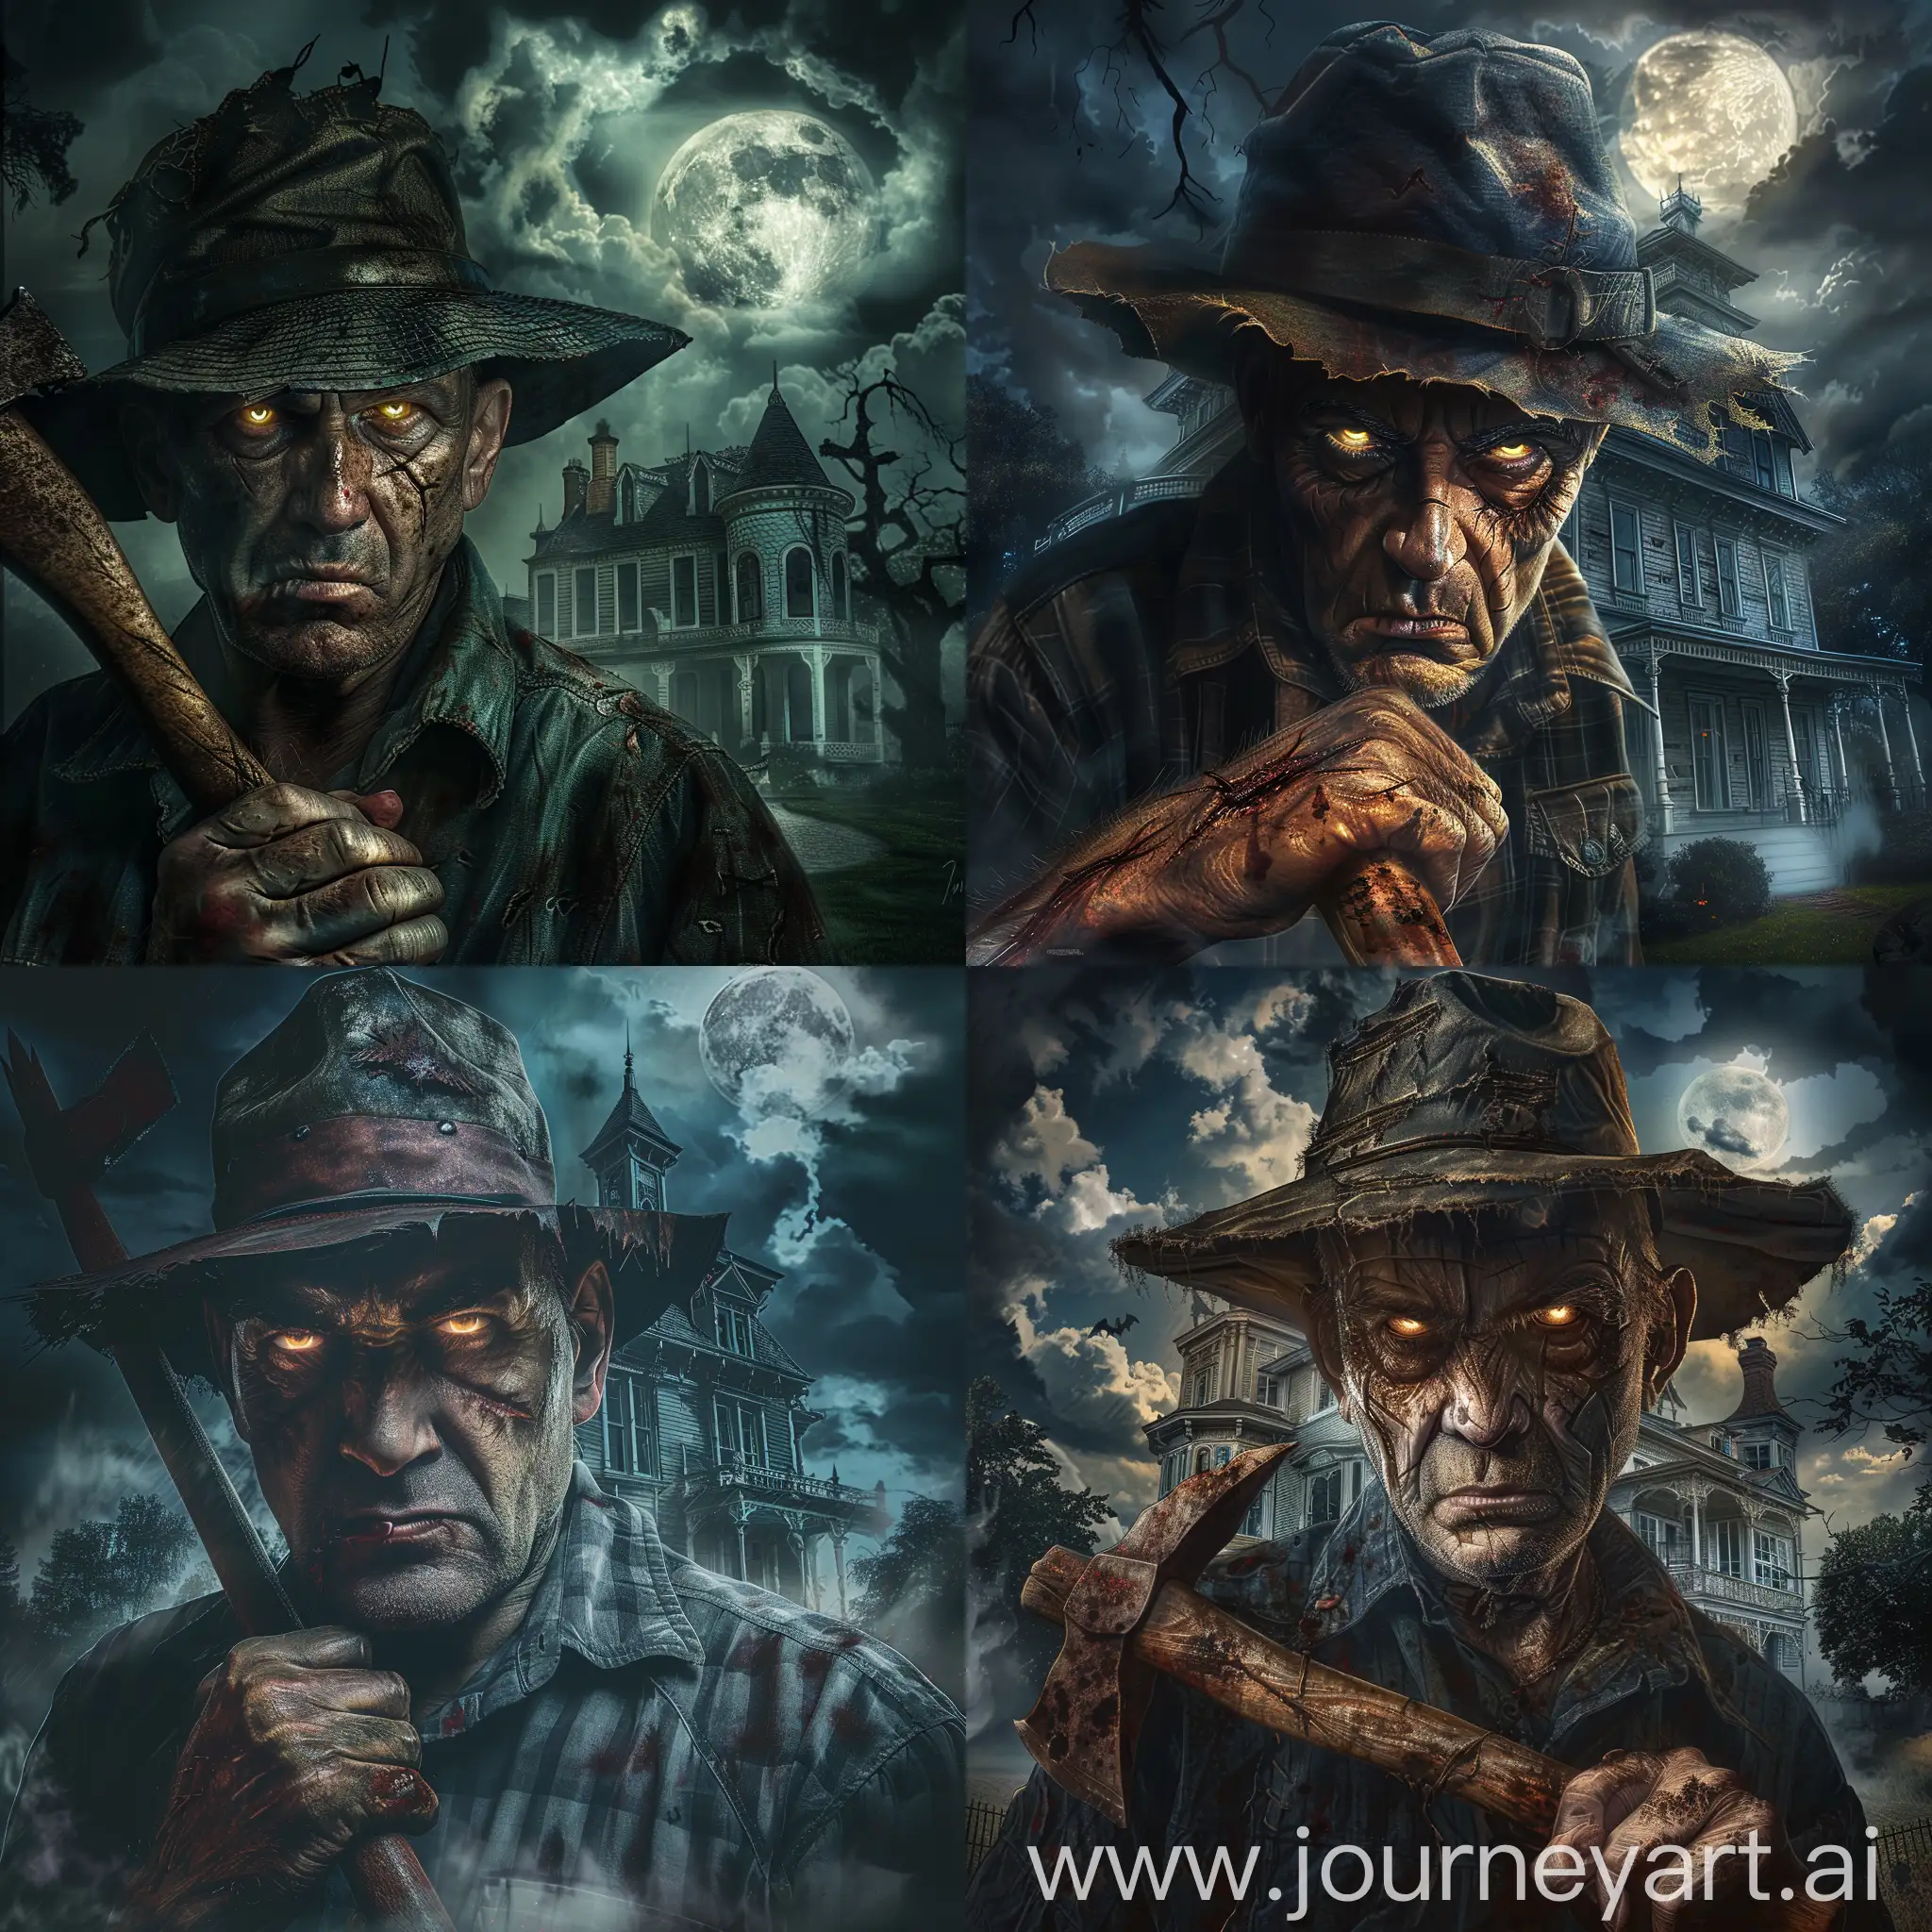 Middle-aged man exuding menace, shadow-draped face, sunken eyes aglow under the brim of a tattered hat, grips a rusted axe, background of a dilapidated Victorian mansion, ominous clouds overhead, full moon piercing through, hint of fog creeping along the ground, chiaroscuro lighting, digital painting, dramatic lighting, ultra realistic